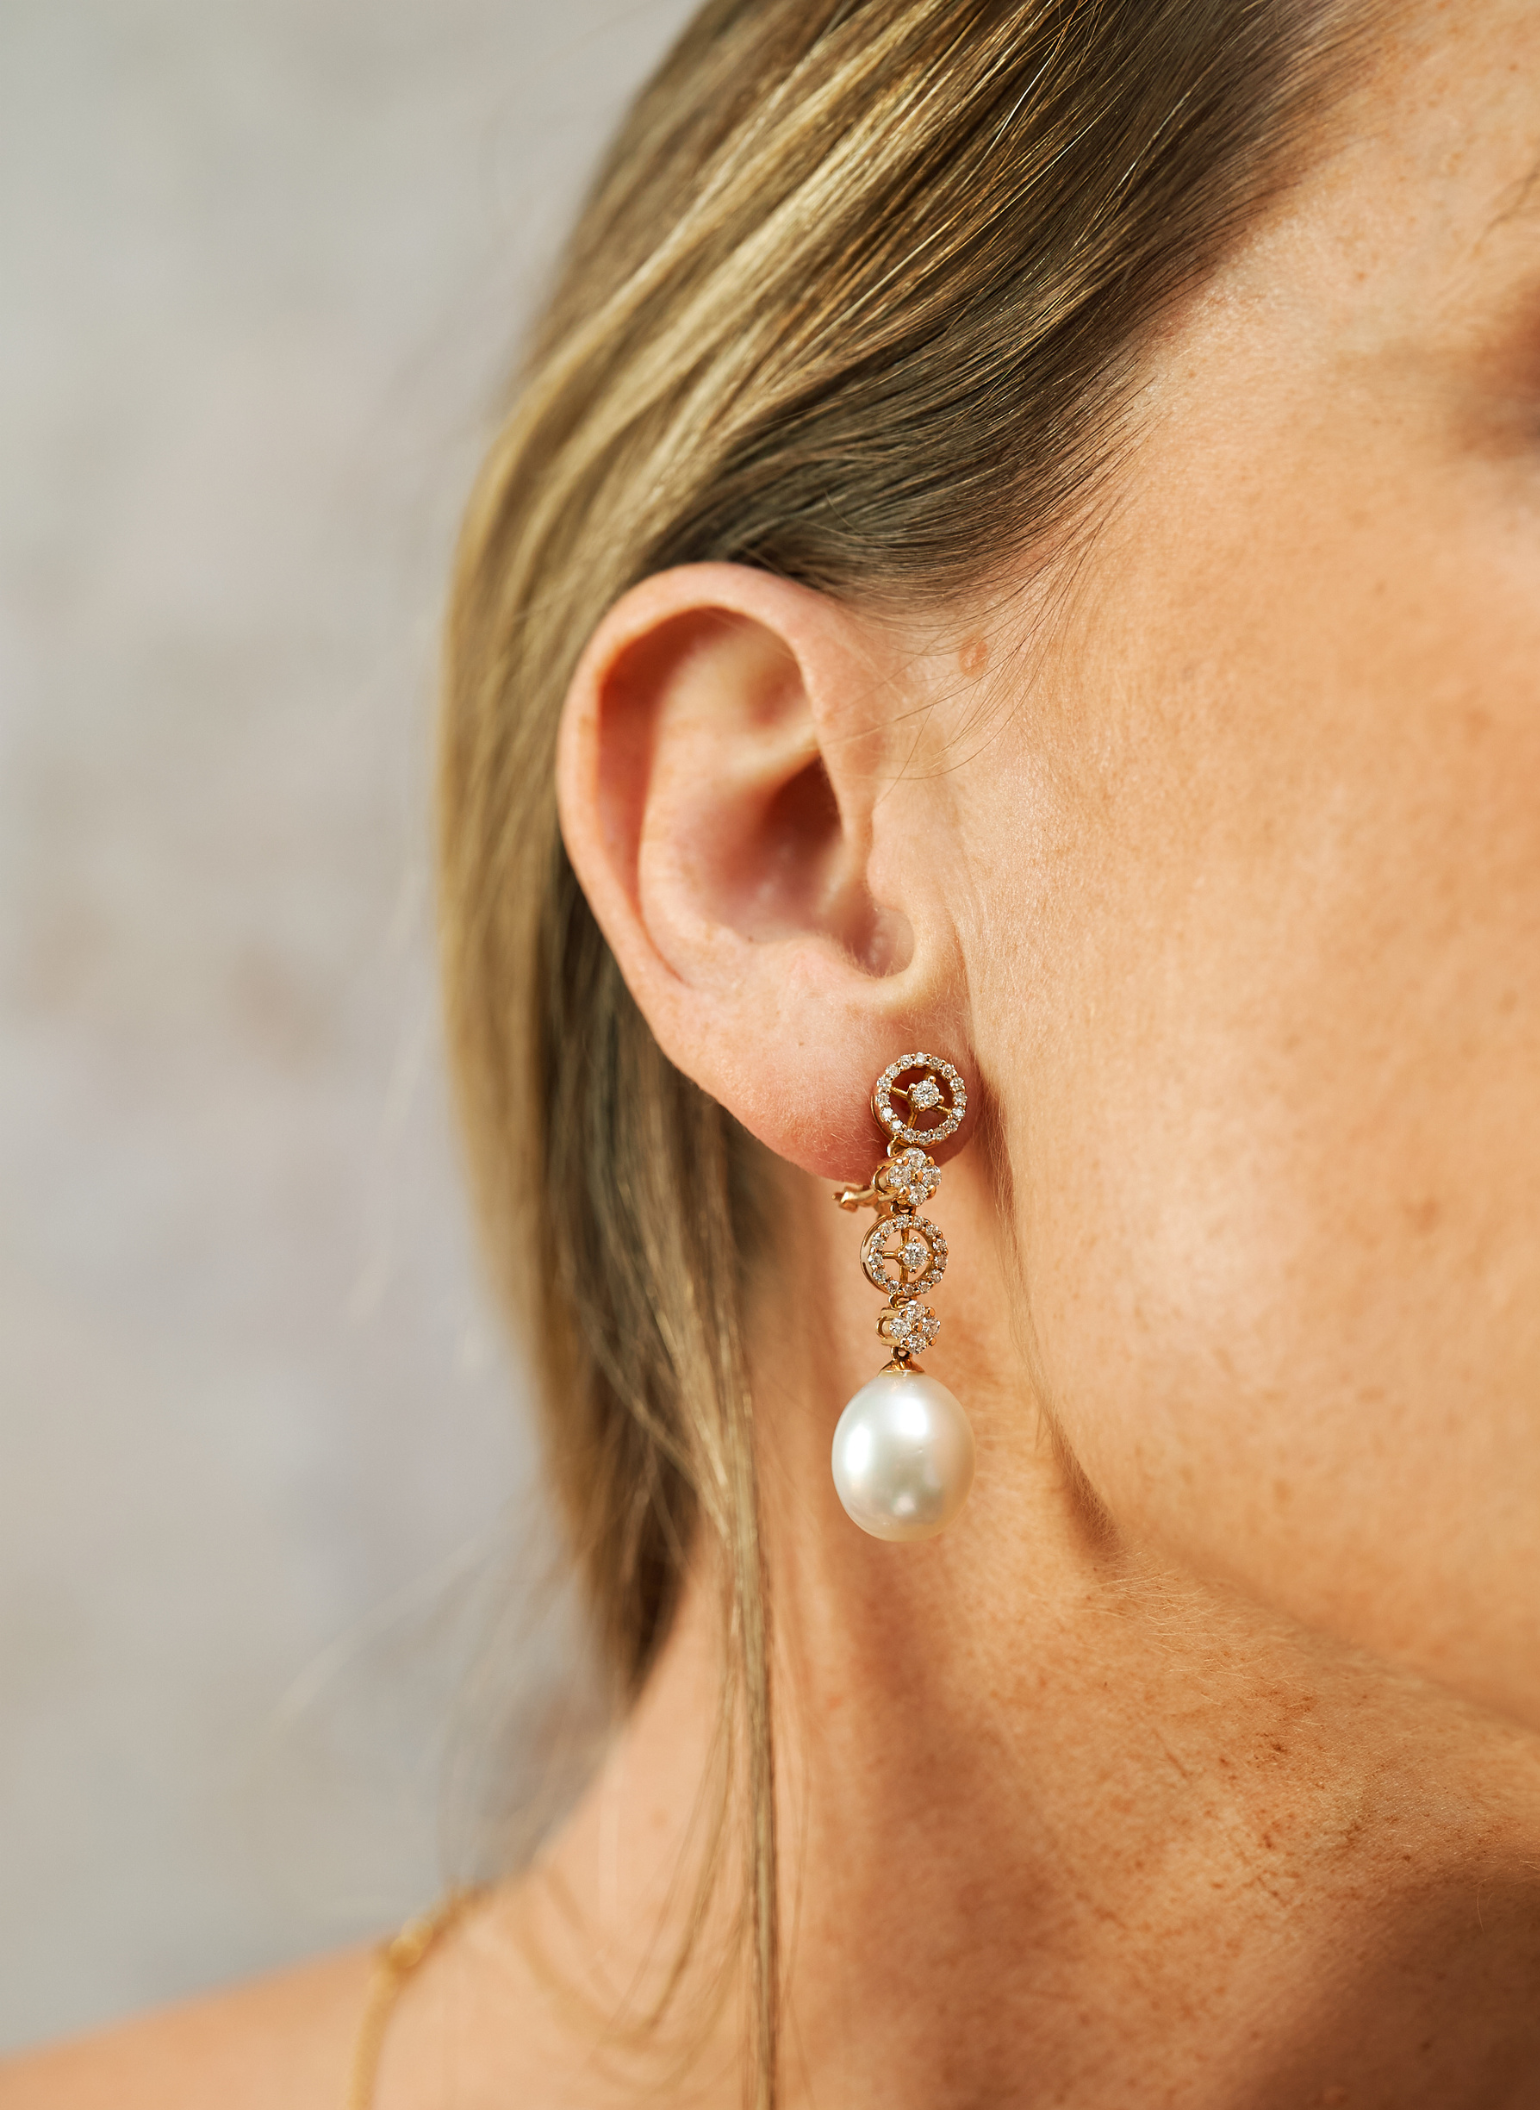 Dolce Far Niente Pearl and Light Agate Earrings